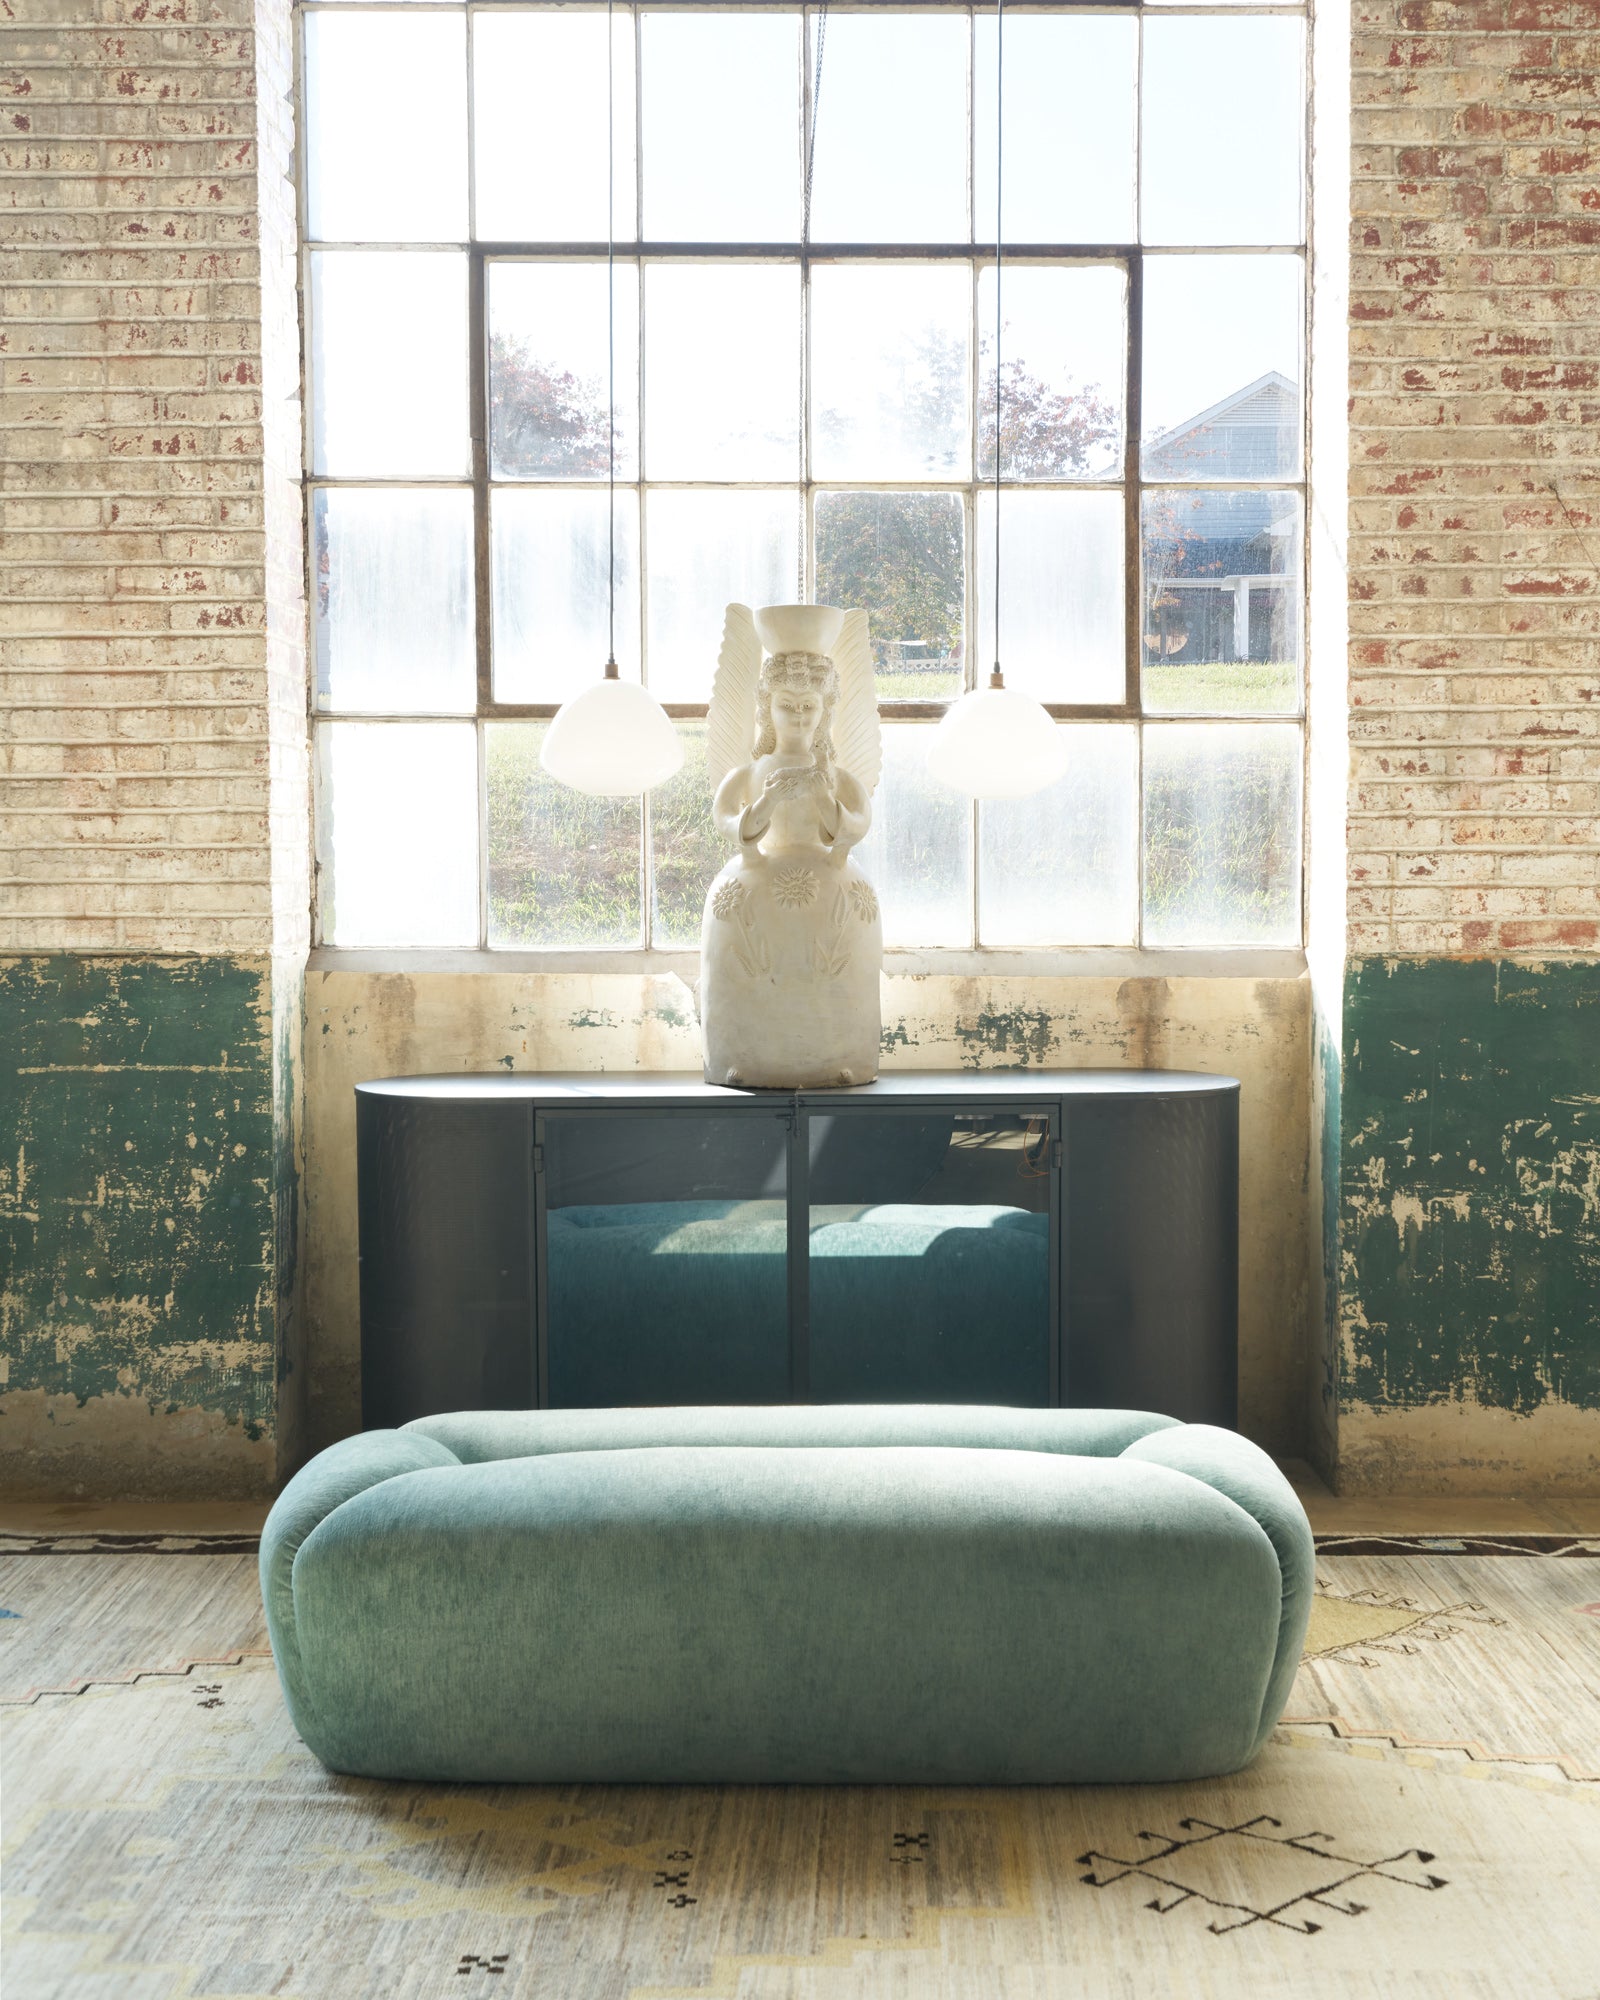  Bench in a showroom in front of a metal credenza with a sculpture on top. Photographed in Velluto Aqua. 